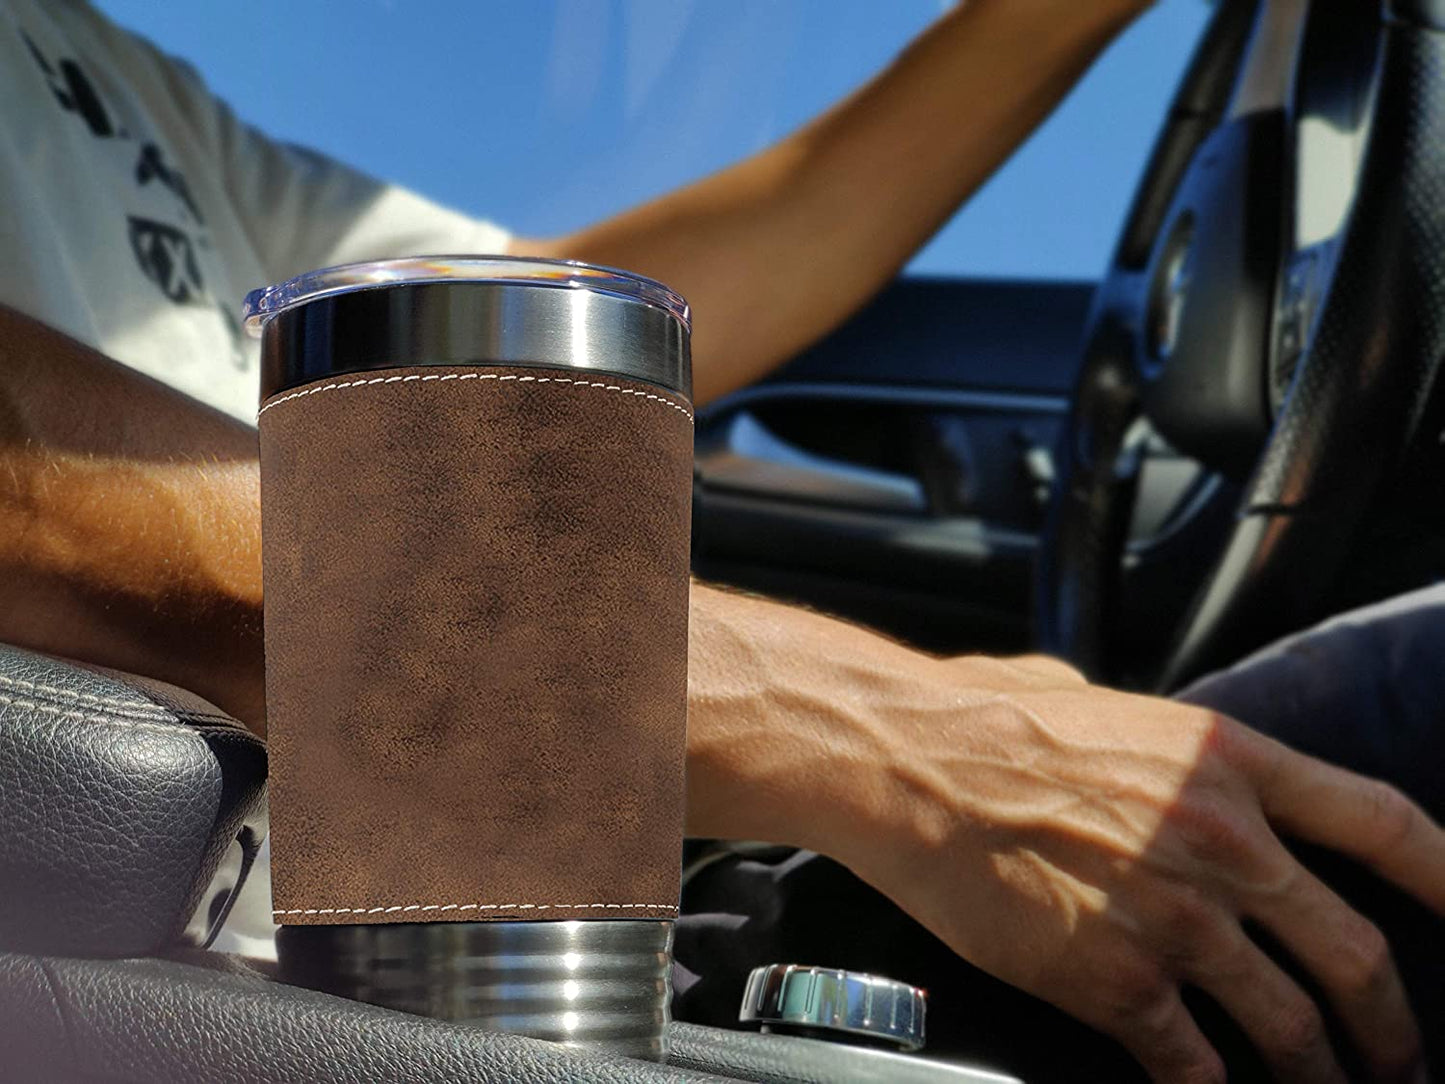 20oz Faux Leather Tumbler Mug, Aerial Silks, Personalized Engraving Included - LaserGram Custom Engraved Gifts